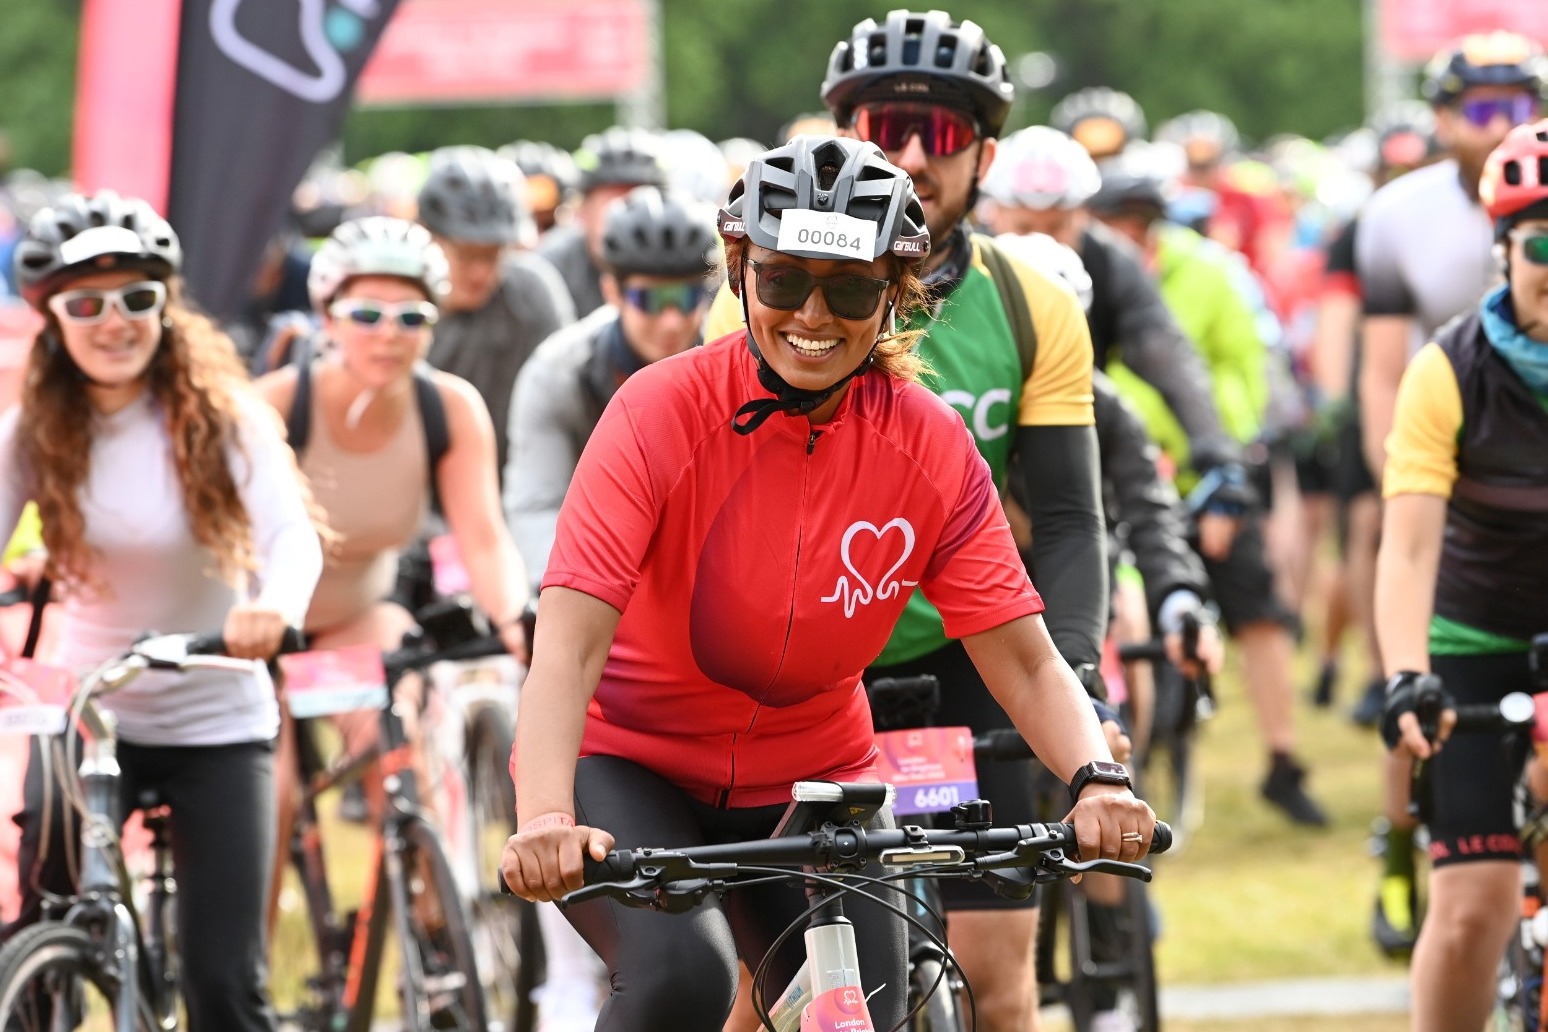 Sadiq Khan joins 14000 people on fundraising bike ride from London to Brighton